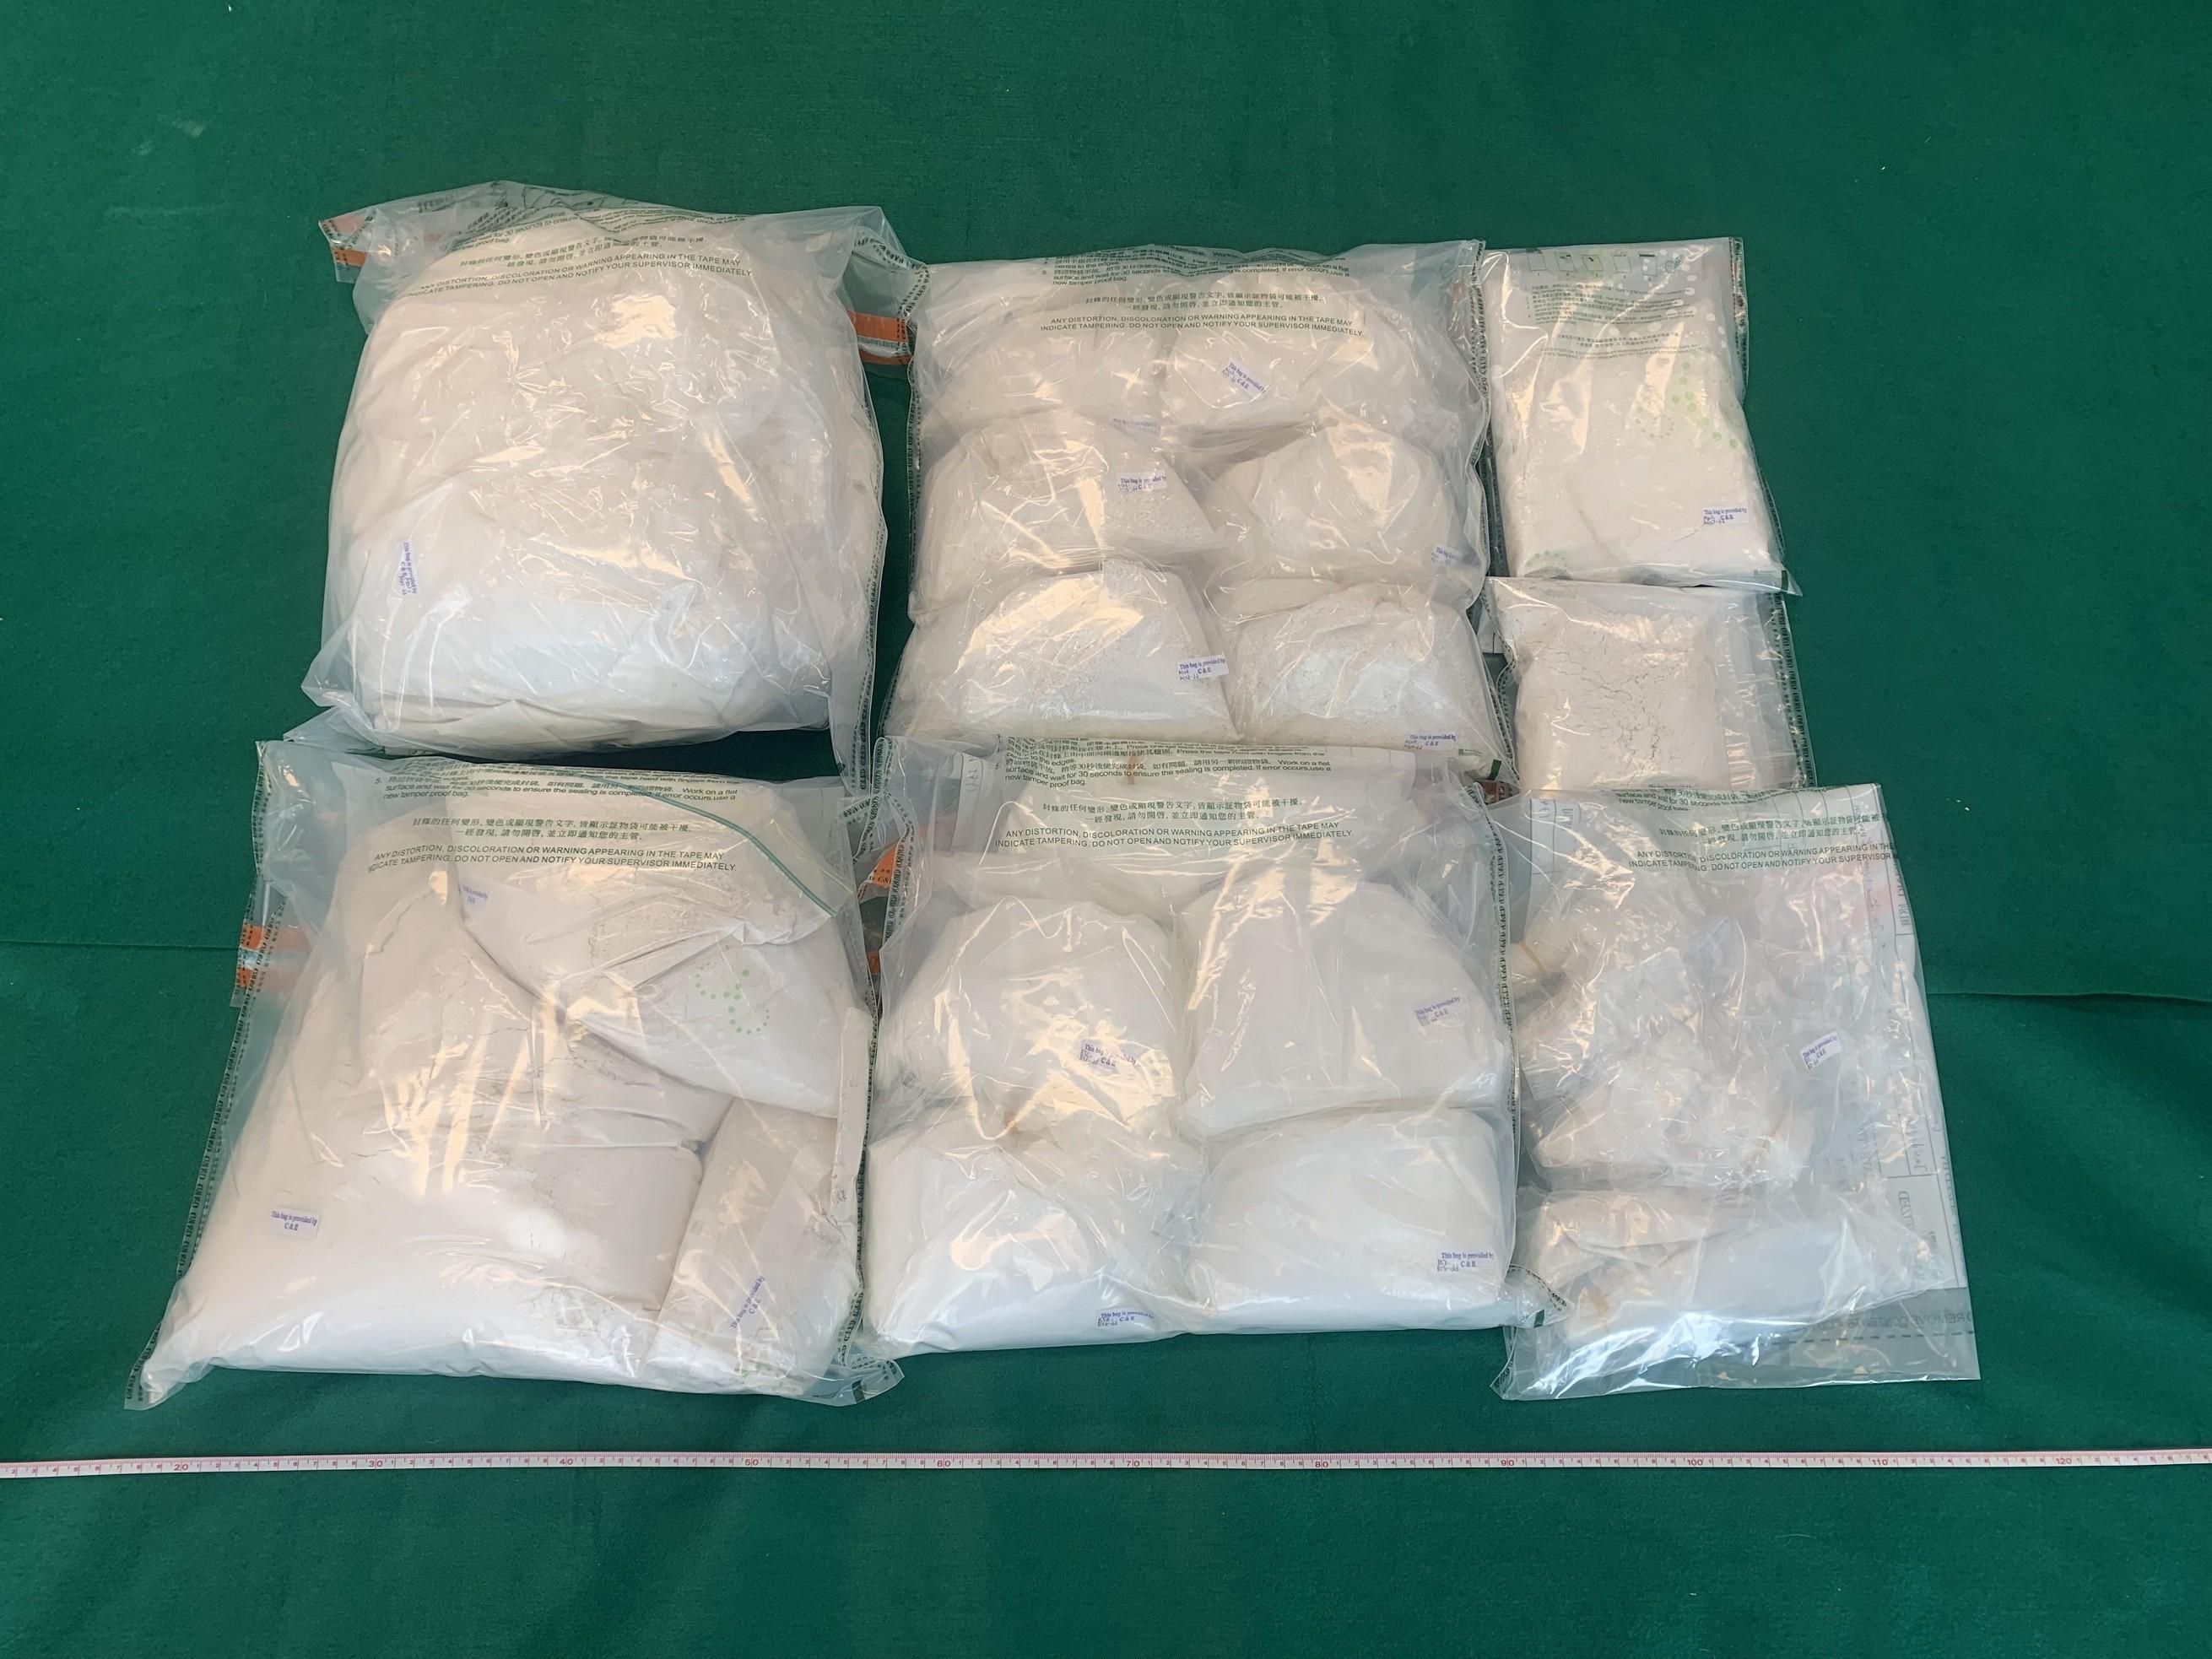 Hong Kong Customs seized about 20 kilograms of suspected heroin and about 2.4kg of suspected cocaine in To Kwa Wan and at Hong Kong International Airport in the past two days (July 21 and 22). The estimated market value was about $18.8 million and about $2.2 million respectively. Photo shows the suspected heroin seized.